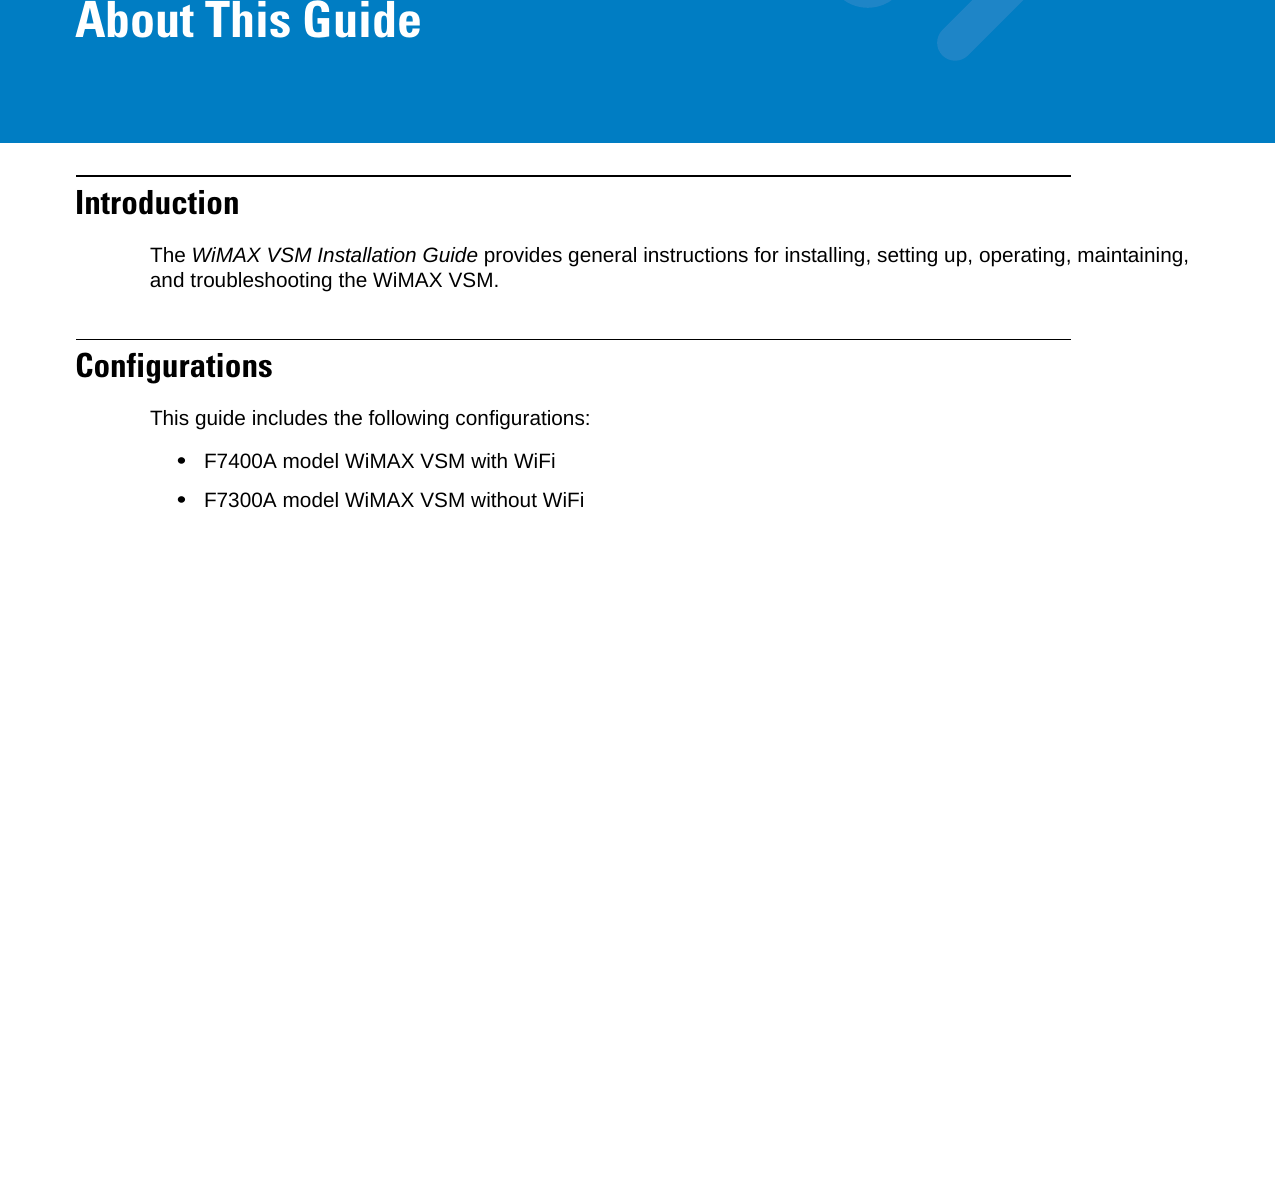 About This GuideIntroductionThe WiMAX VSM Installation Guide provides general instructions for installing, setting up, operating, maintaining, and troubleshooting the WiMAX VSM.ConfigurationsThis guide includes the following configurations:•F7400A model WiMAX VSM with WiFi•F7300A model WiMAX VSM without WiFi